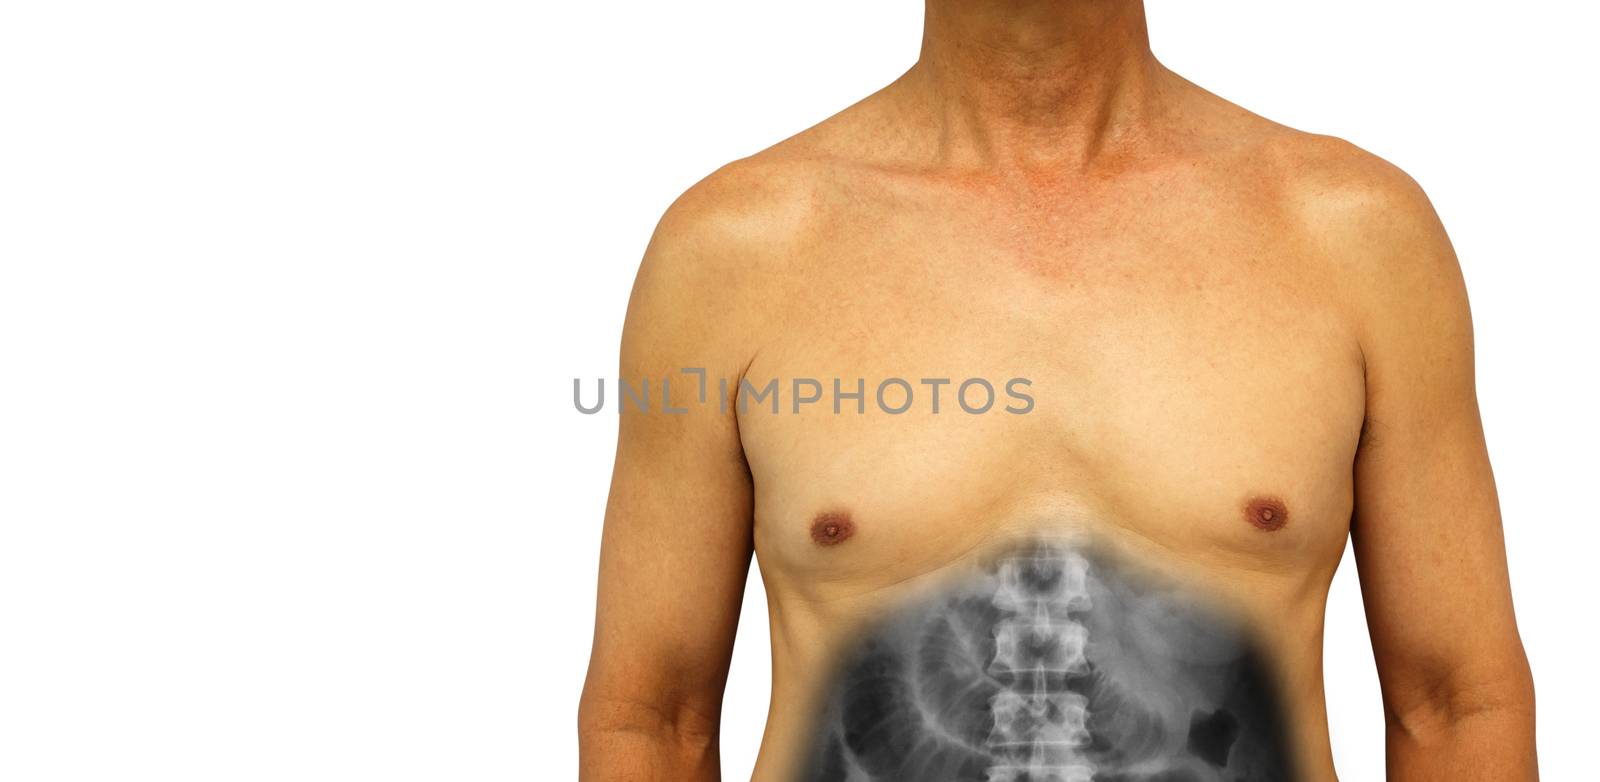 Colon cancer and Small intestine obstruction . Human abdomen with x-ray show small bowel dilated due to obstructed . Isolated background . Blank area at left side .